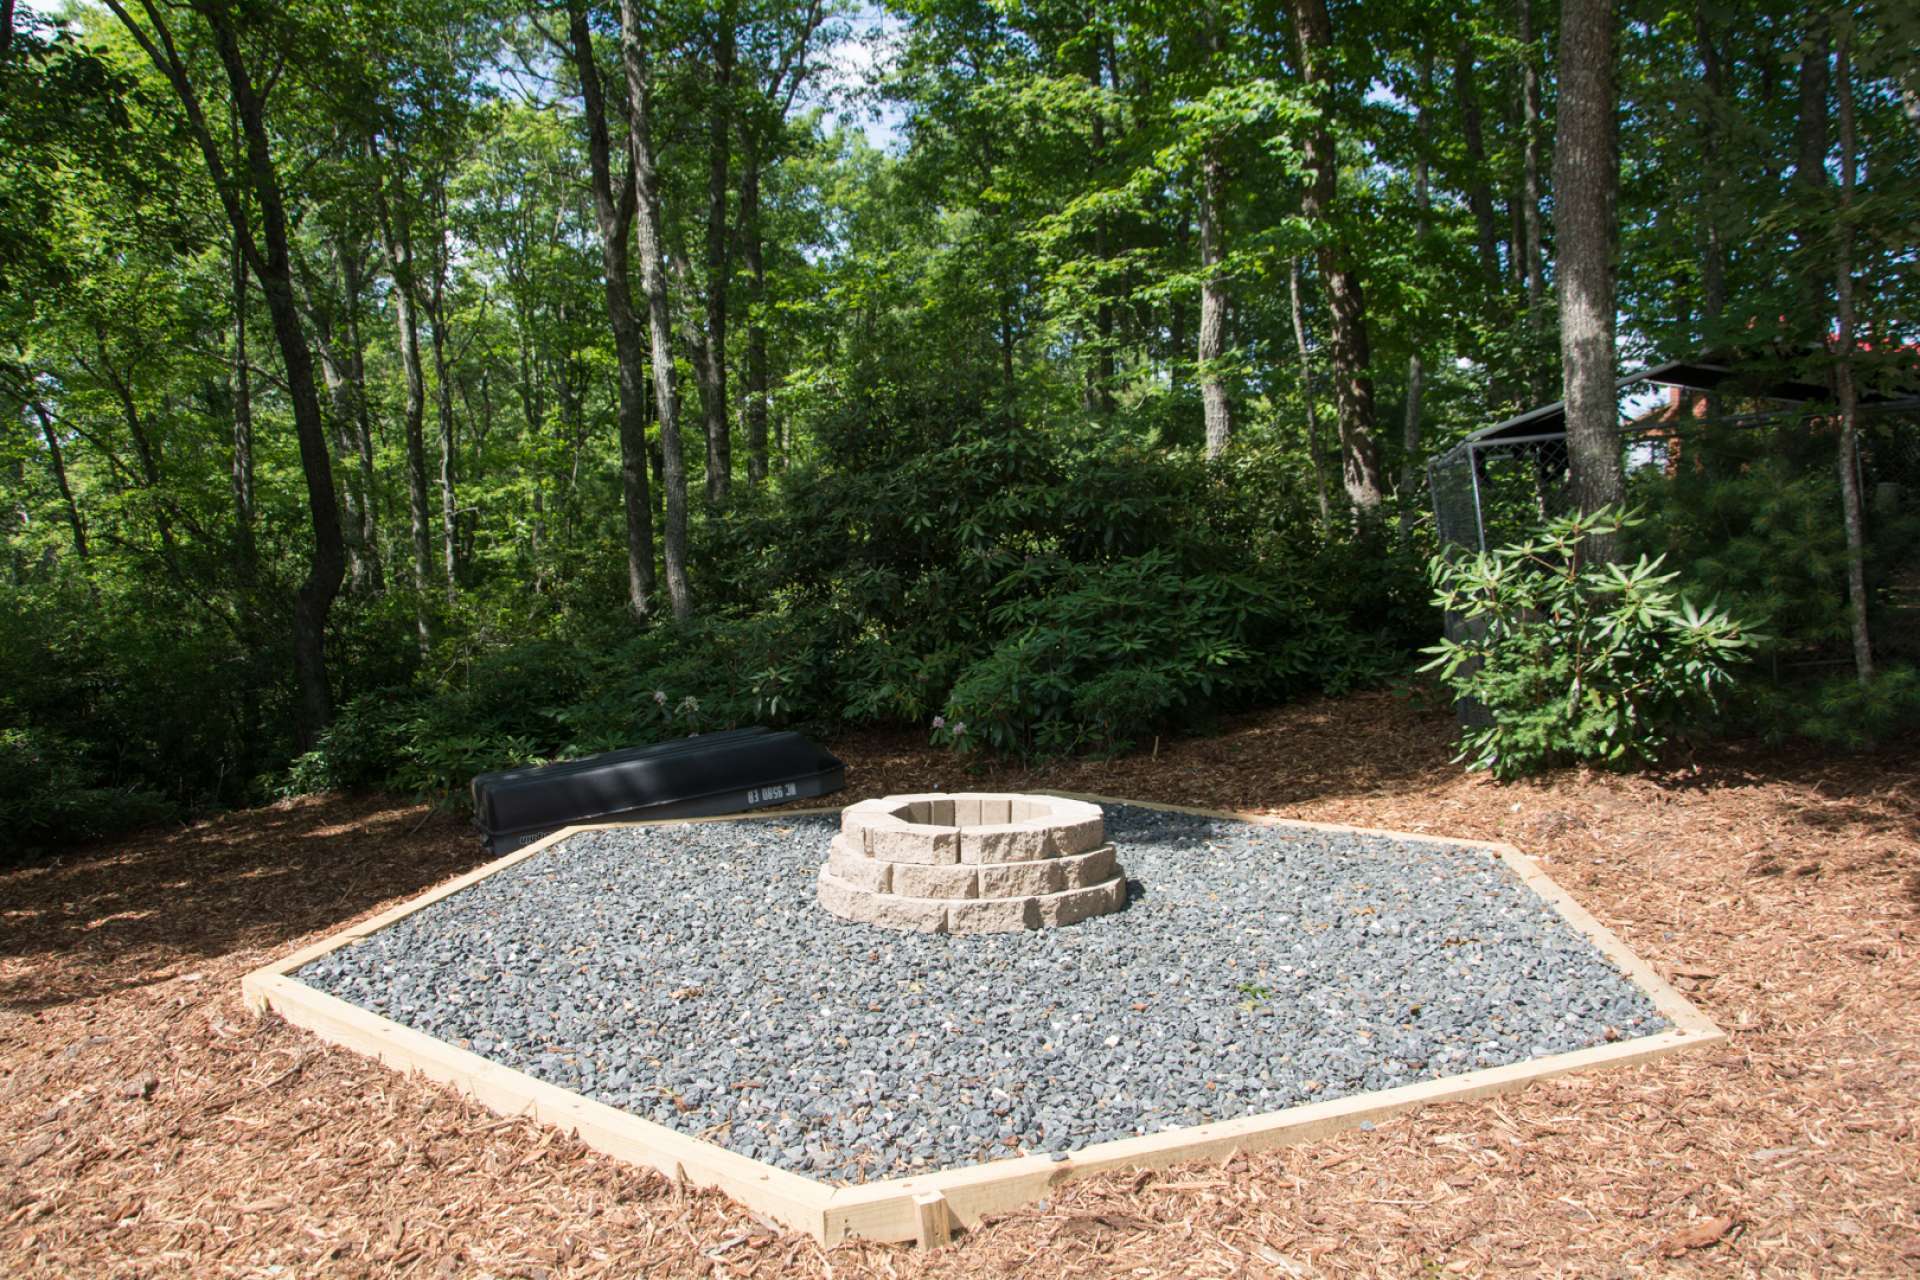 Gather around the firepit for a fun filled evening roasting hot dogs, making smores, and sharing  family stories and folklore with family and friends.  Savor the natural 1.617 acre setting with native mountain foliage and mixture of hardwoods and evergreens.